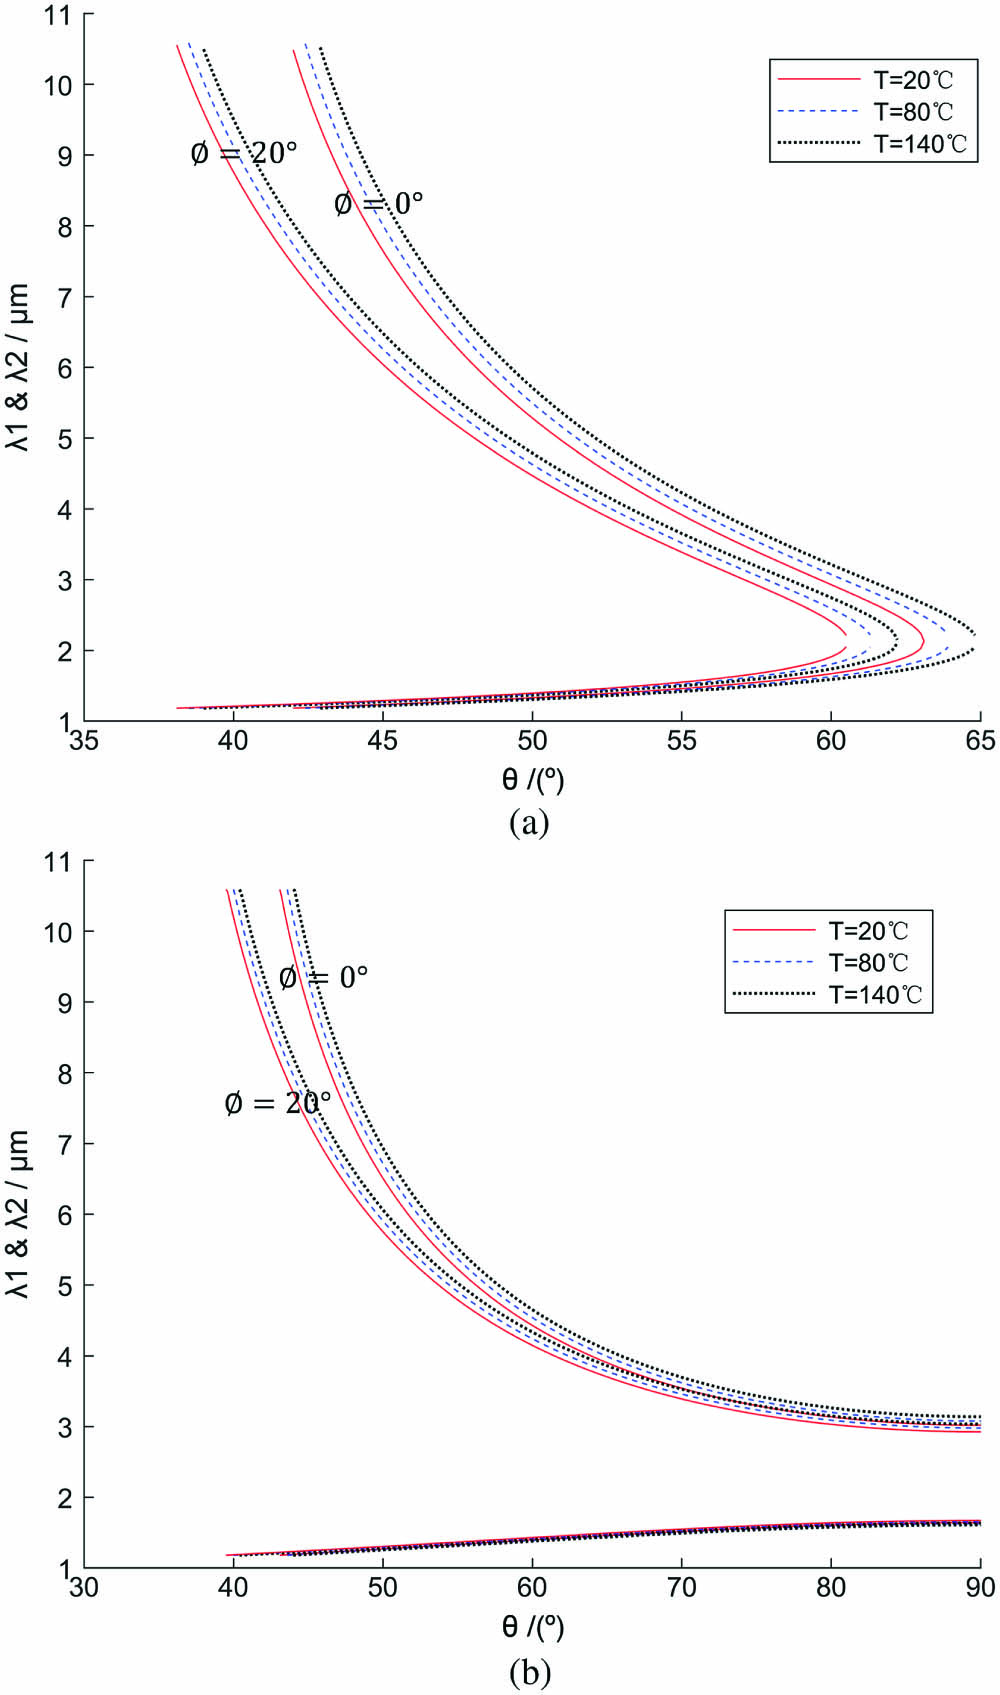 Phase matching curve at 20°C, 80°C, and 140°C under (a) type I and (b) type II-B conditions (λ3=1064 nm, ∅=0°, 20°).